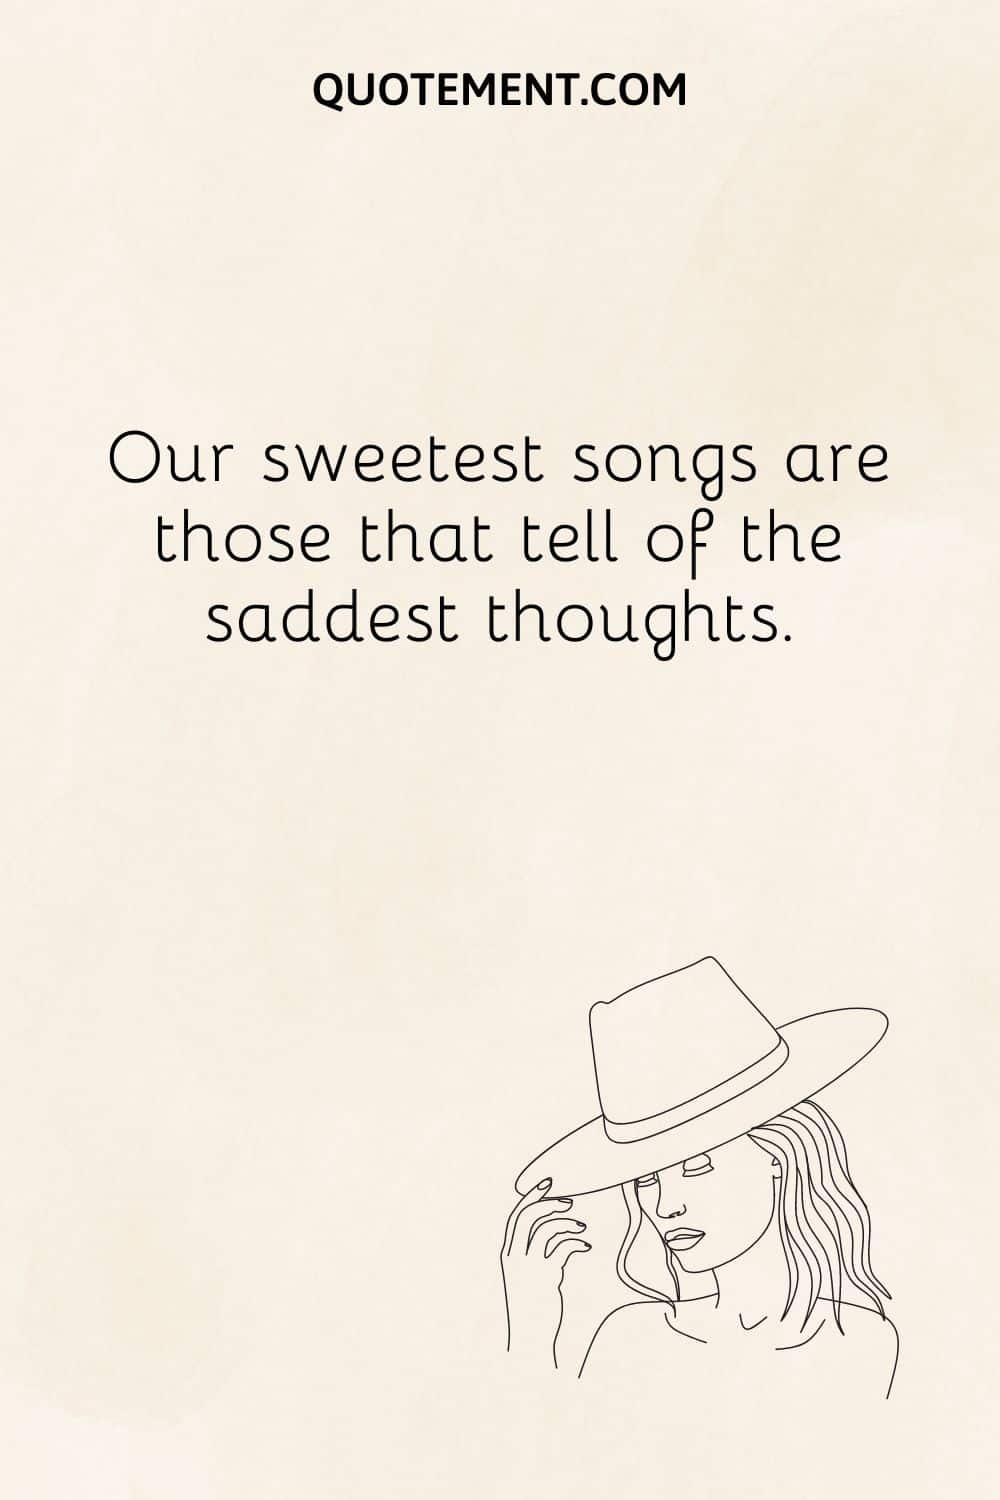 Our sweetest songs are those that tell of the saddest thoughts.
